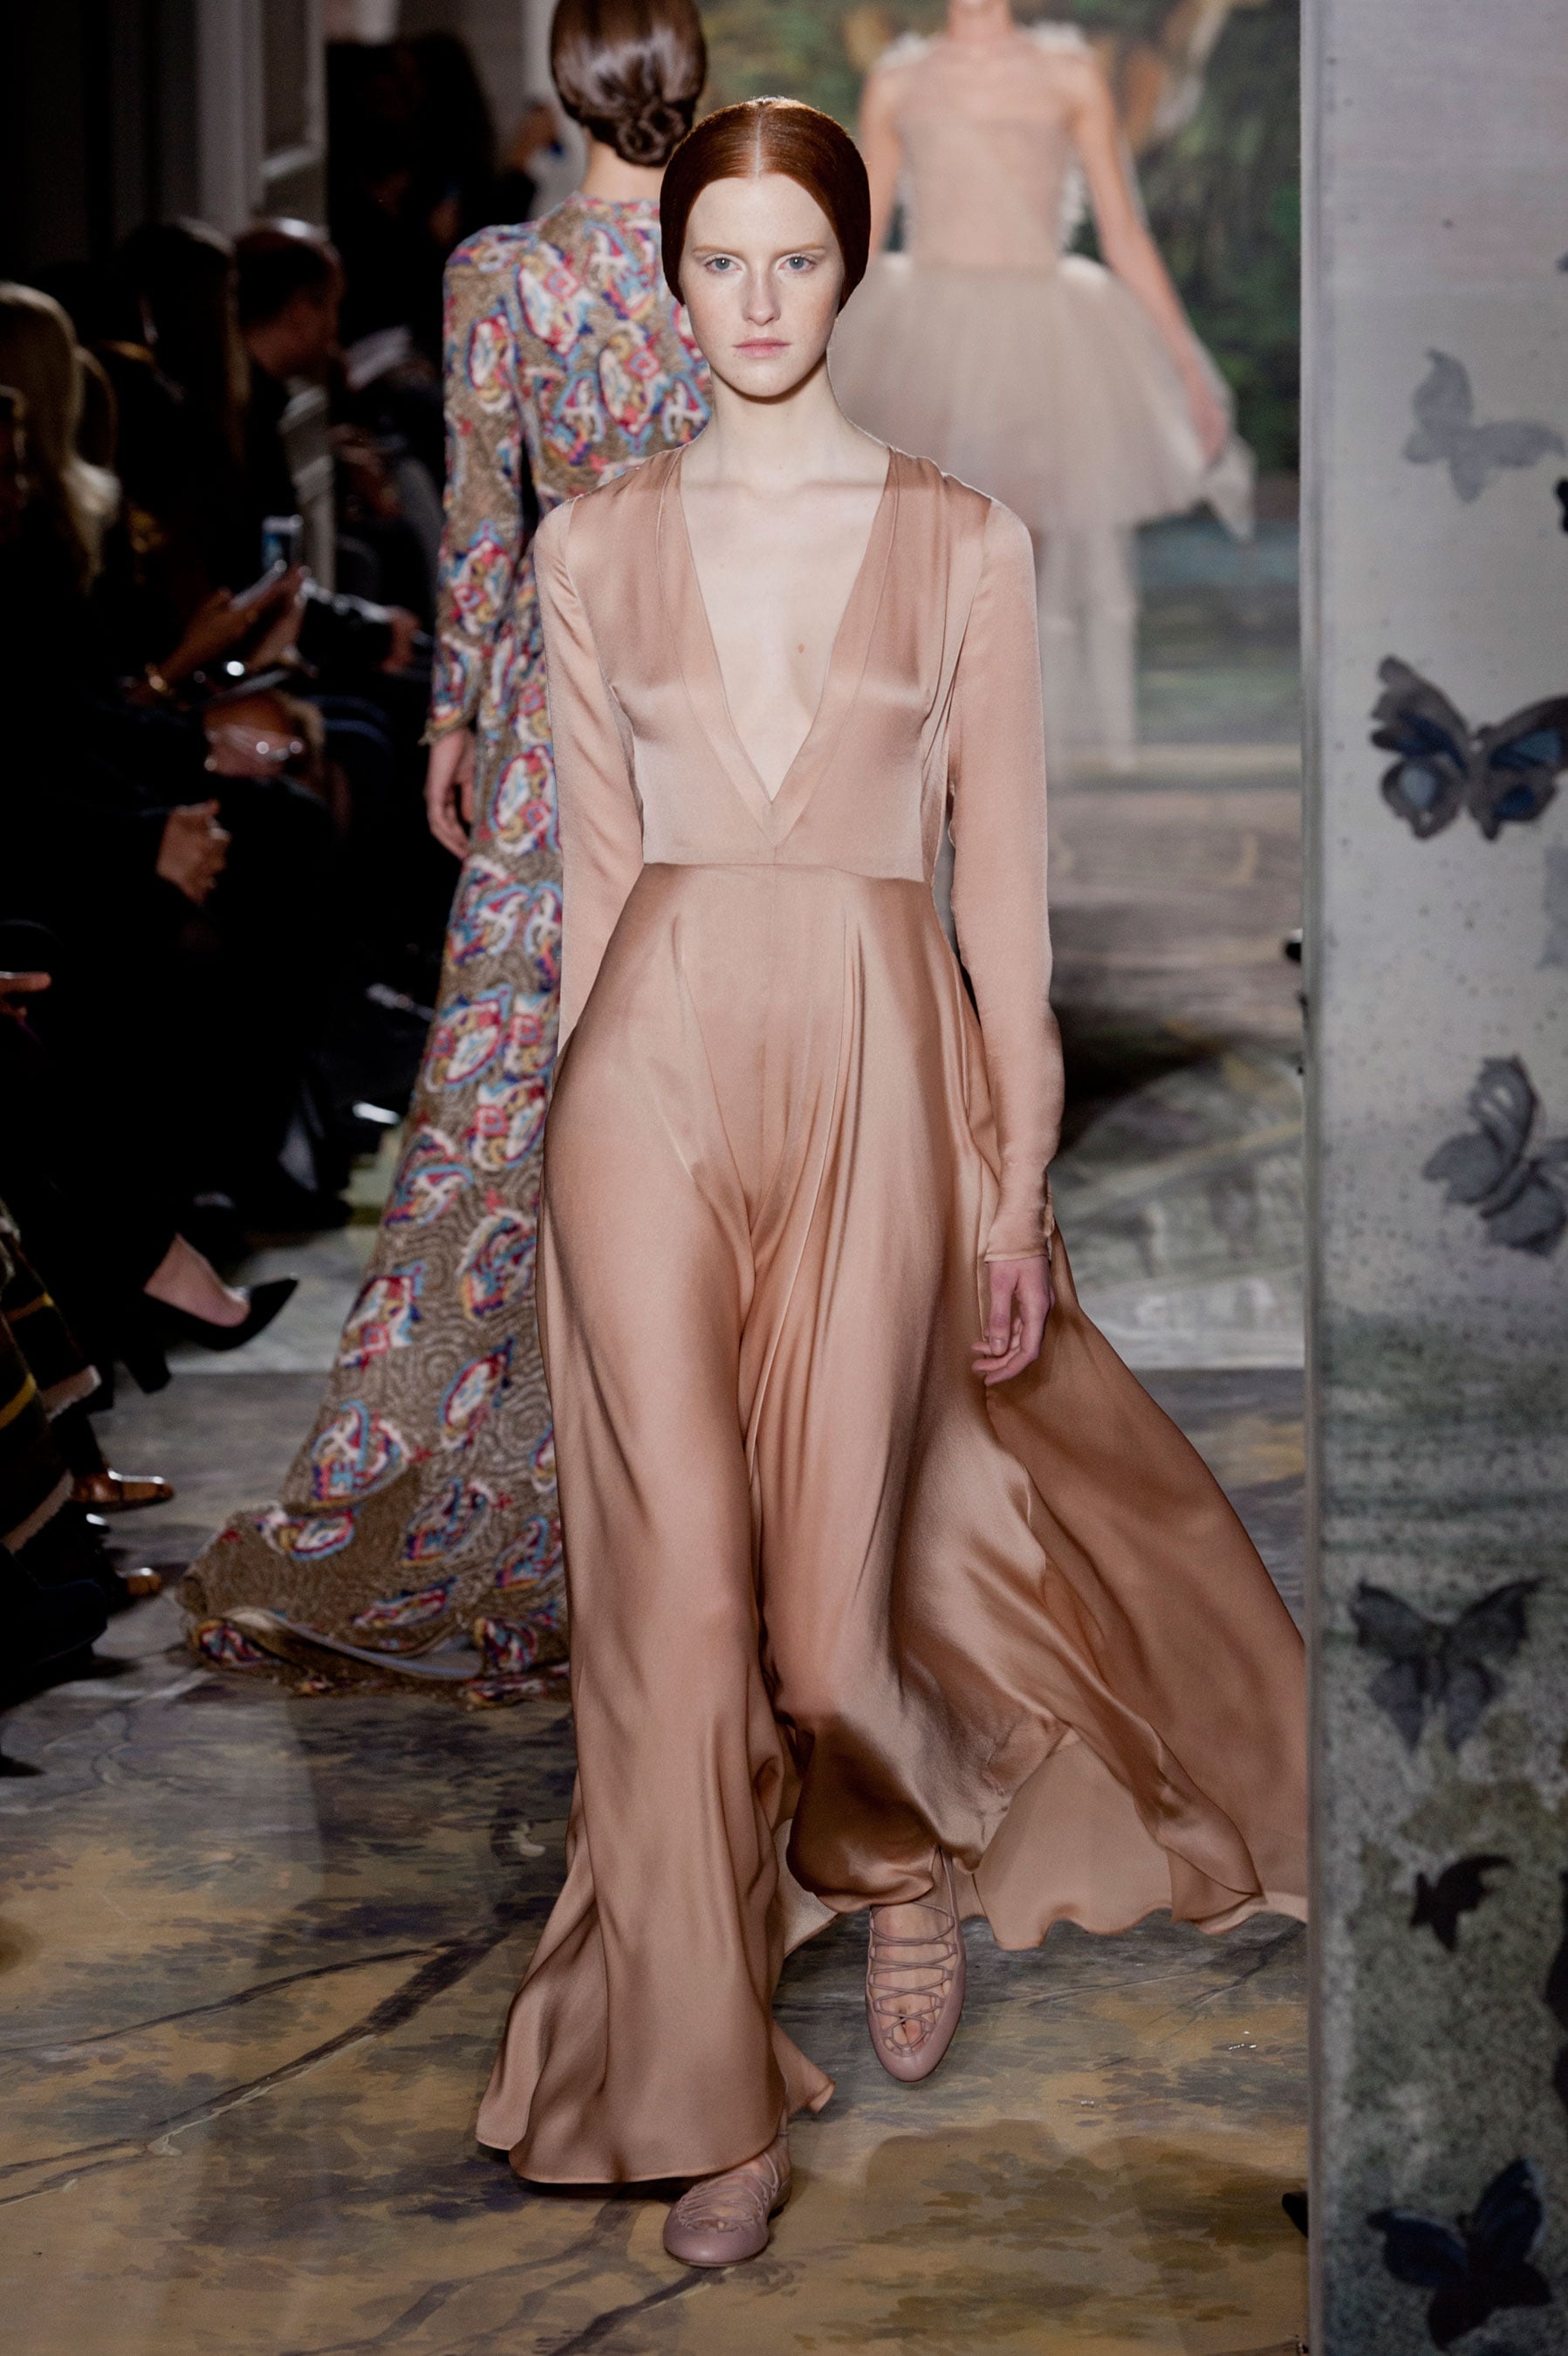 bid Koncentration Opaque Valentino Haute Couture Spring 2014 | Valentino Haute Couture Gives Us a  Whole Other Kind of Swan Song | POPSUGAR Fashion Photo 48